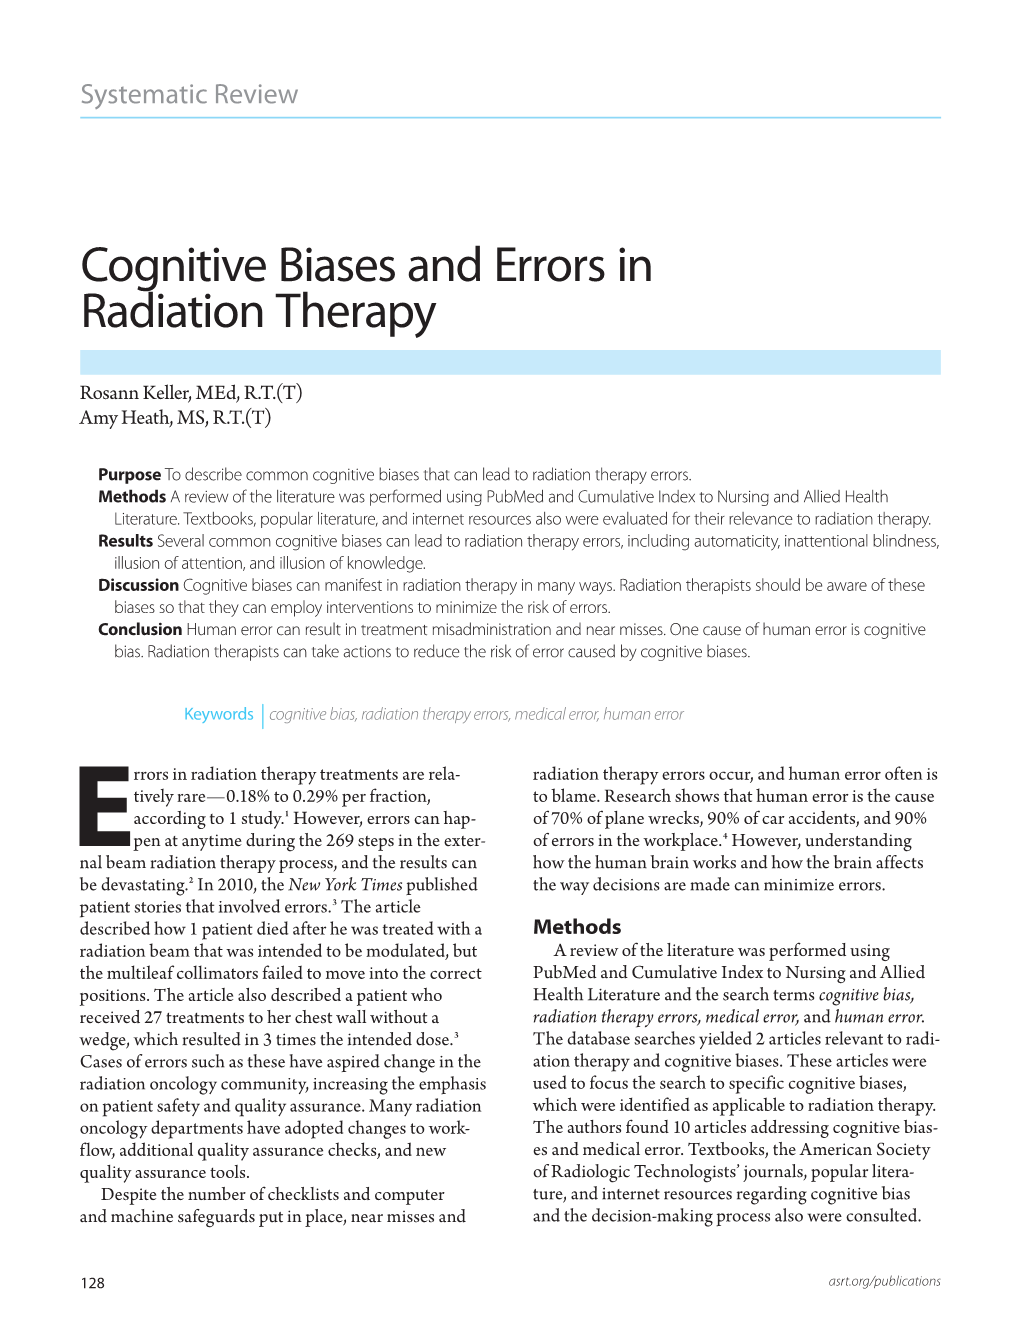 Cognitive Biases and Errors in Radiation Therapy